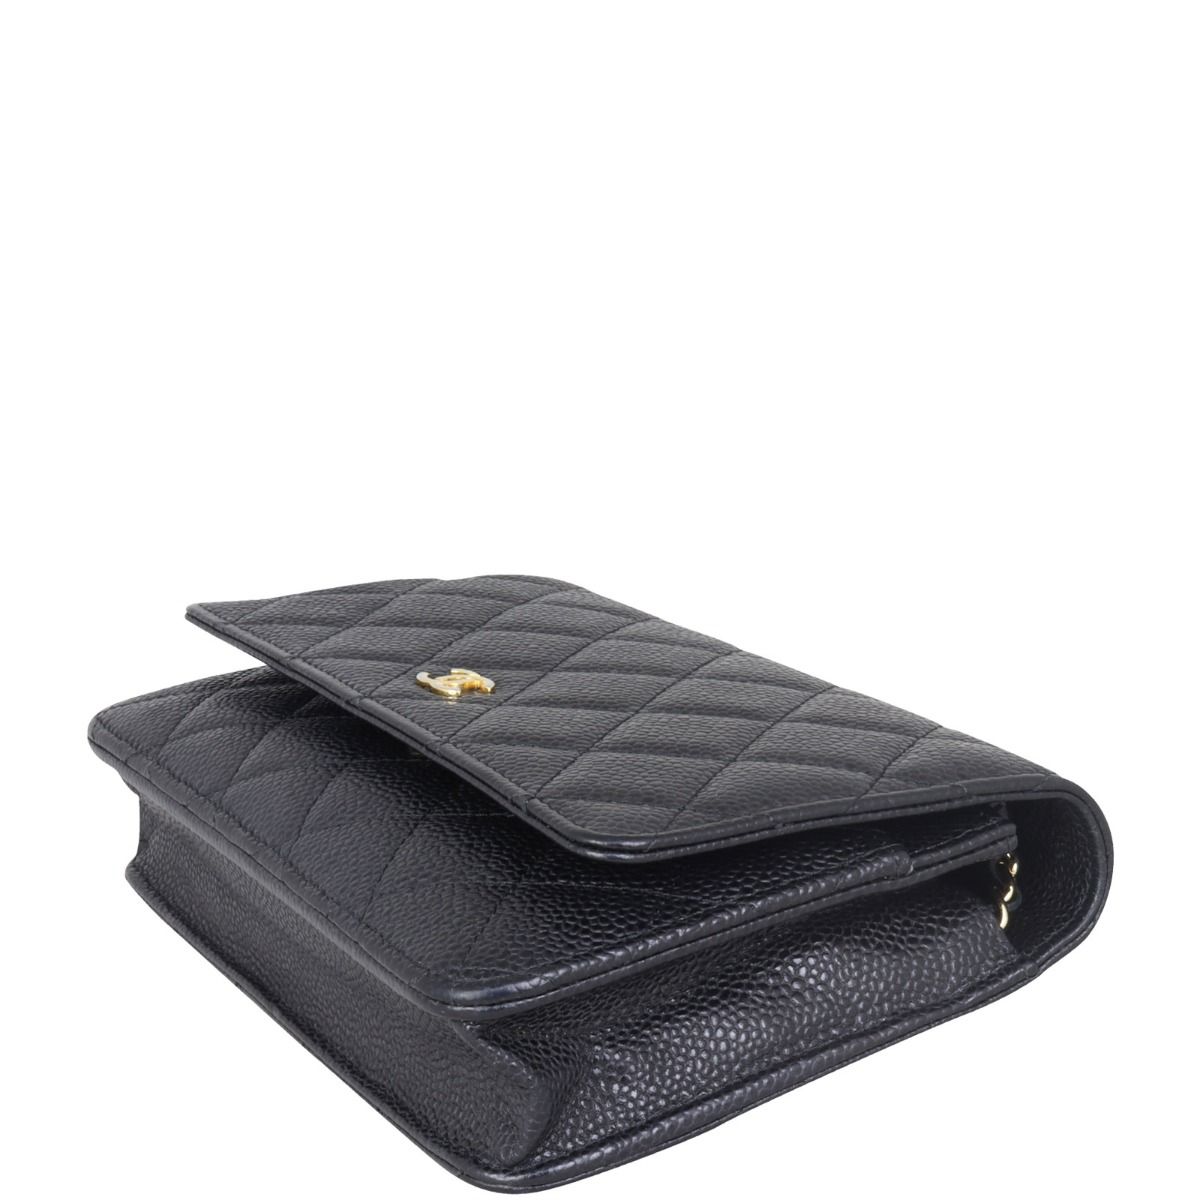 Chanel Lambskin Quilted Chanel 19 Wallet On Chain WOC Black  STYLISHTOP